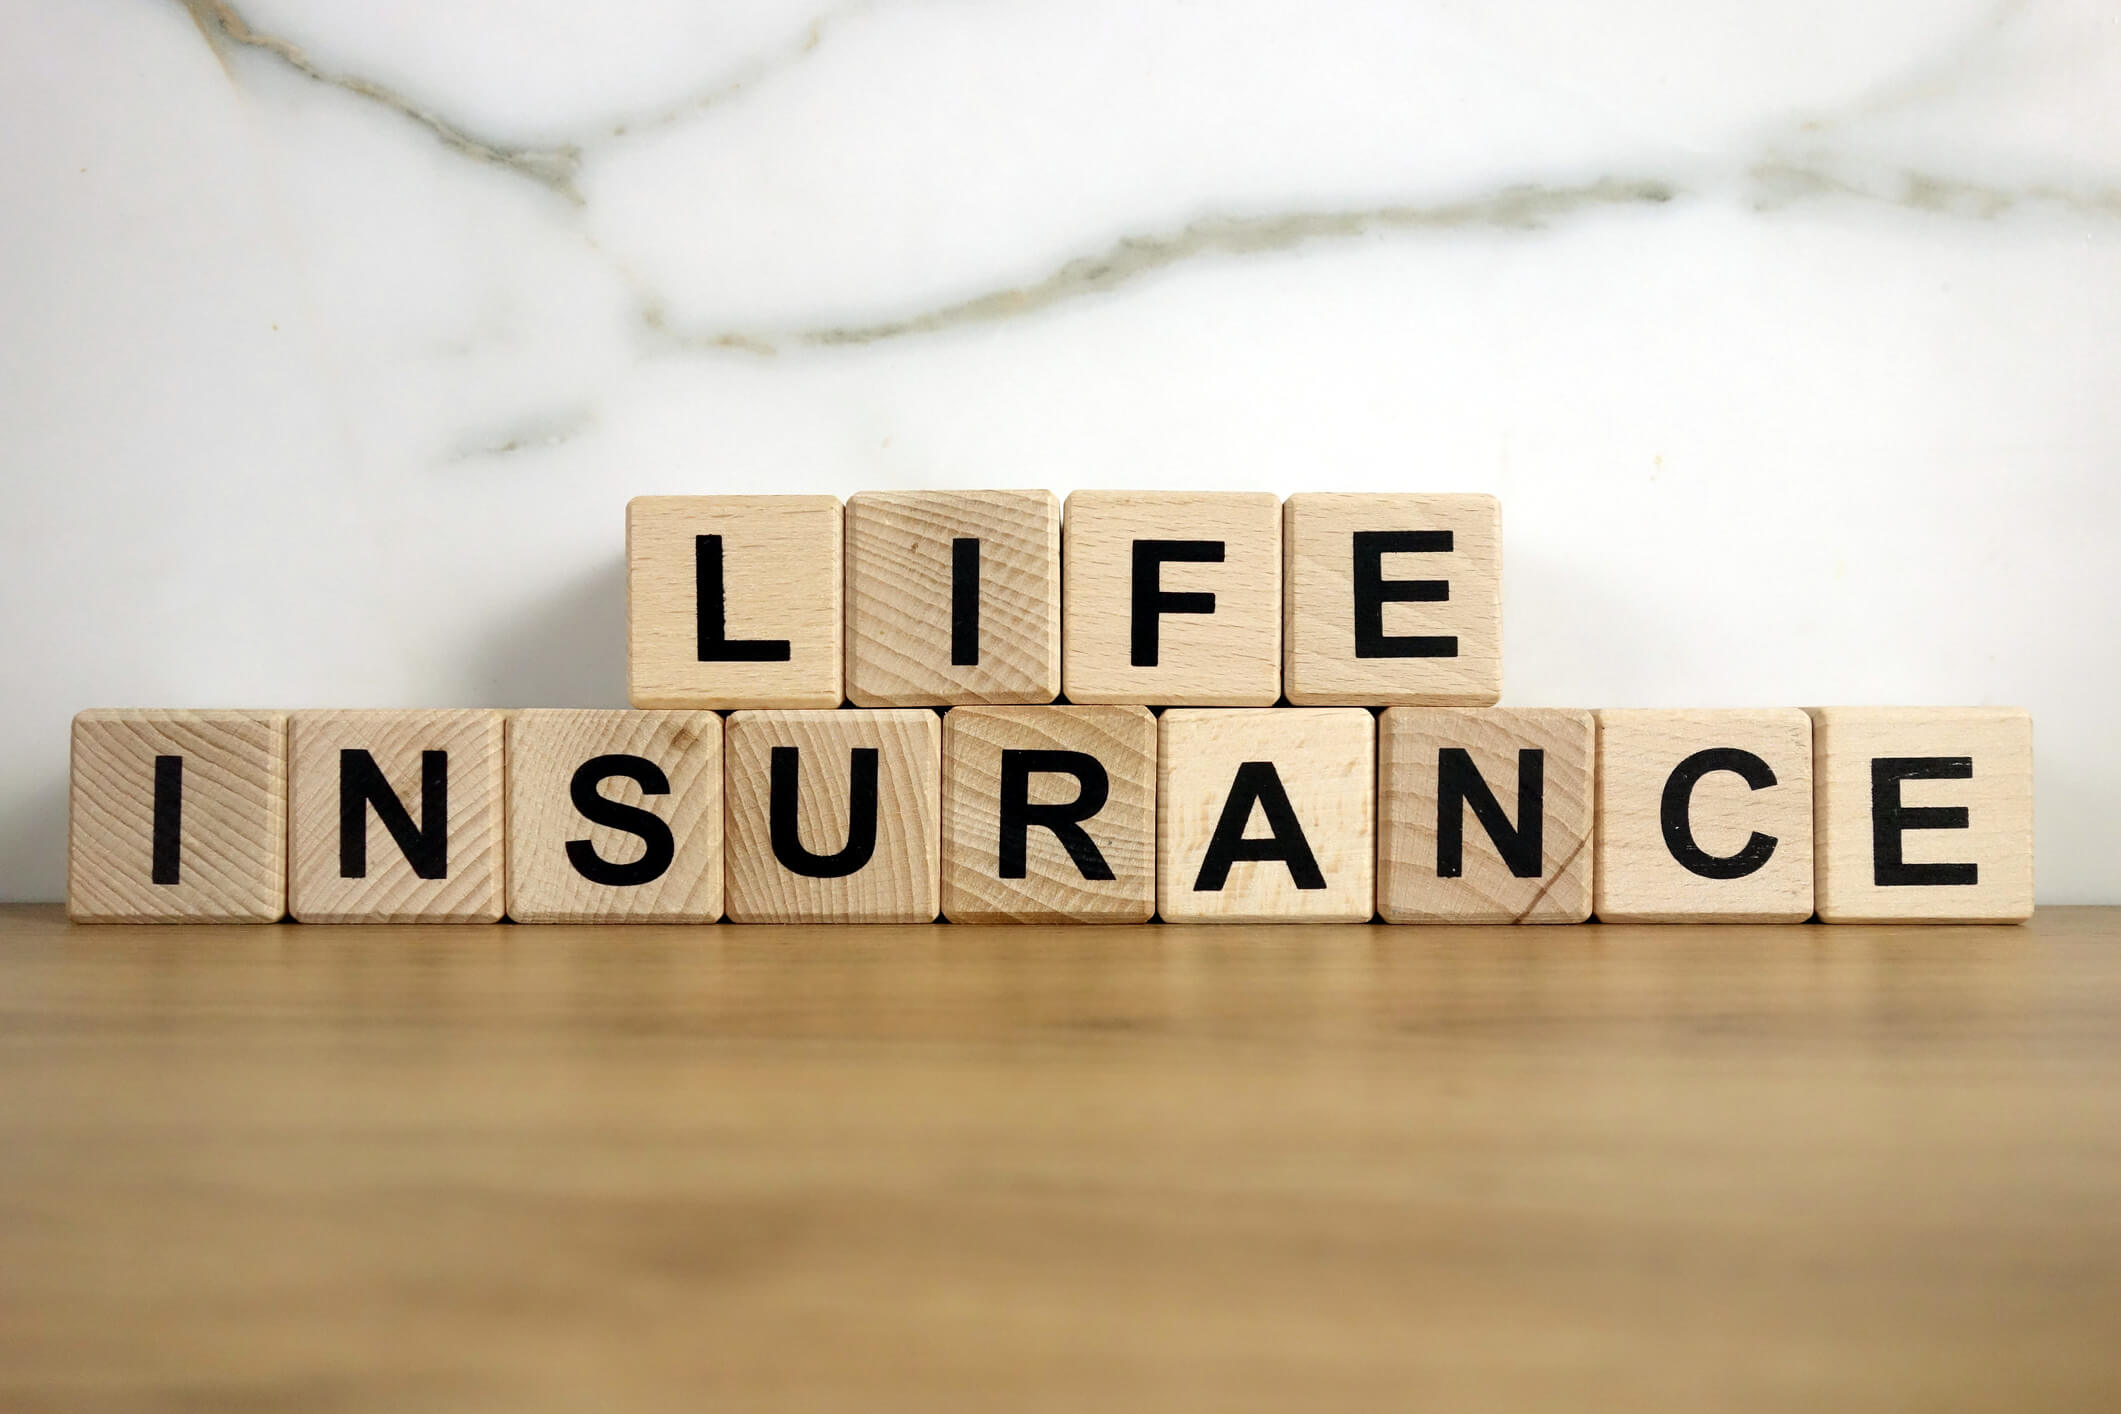 Life Insurance - Complete Controller